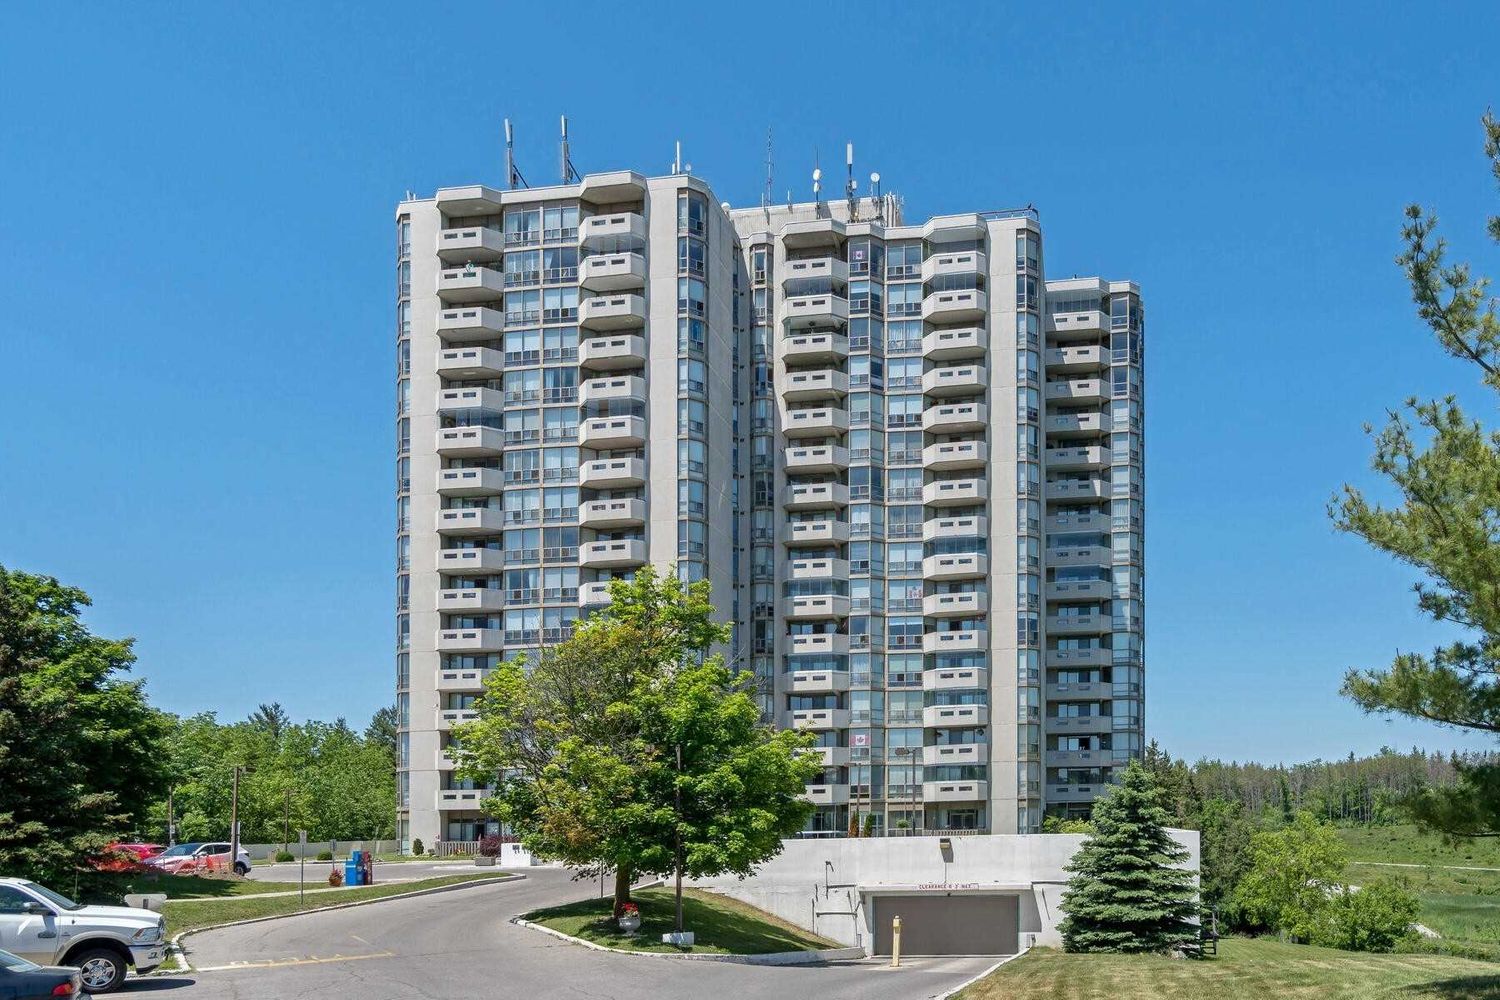 20 McFarlane Drive. The Sands Condos is located in  Halton Hills, Toronto - image #2 of 3